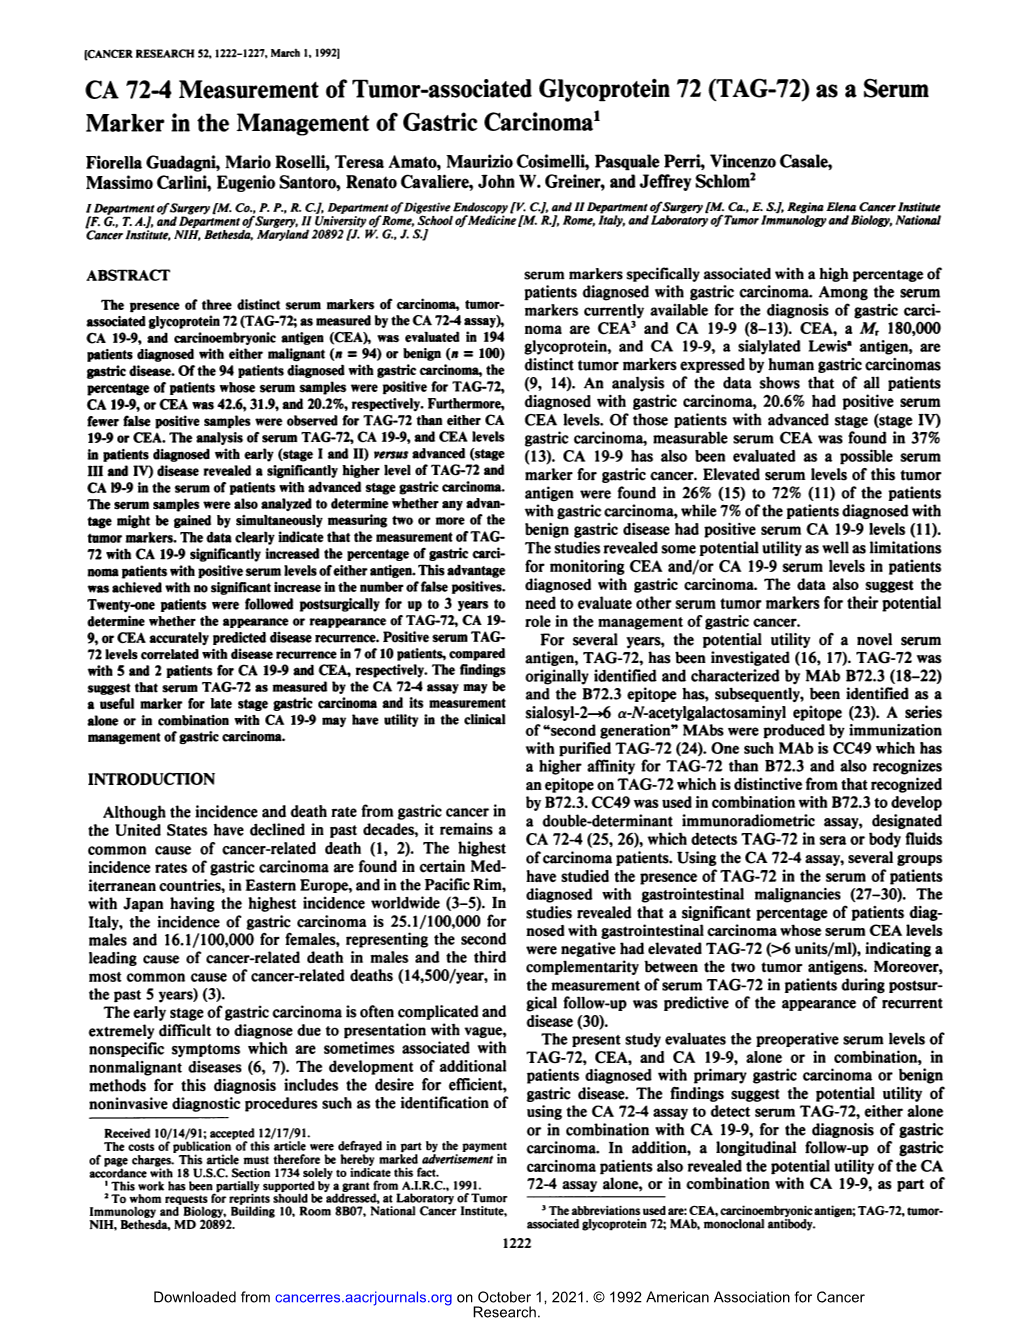 CA 72-4 Measurement of Tumor-Associated Glycoprotein 72 (TAG-72) As a Serum Marker in the Management of Gastric Carcinoma1